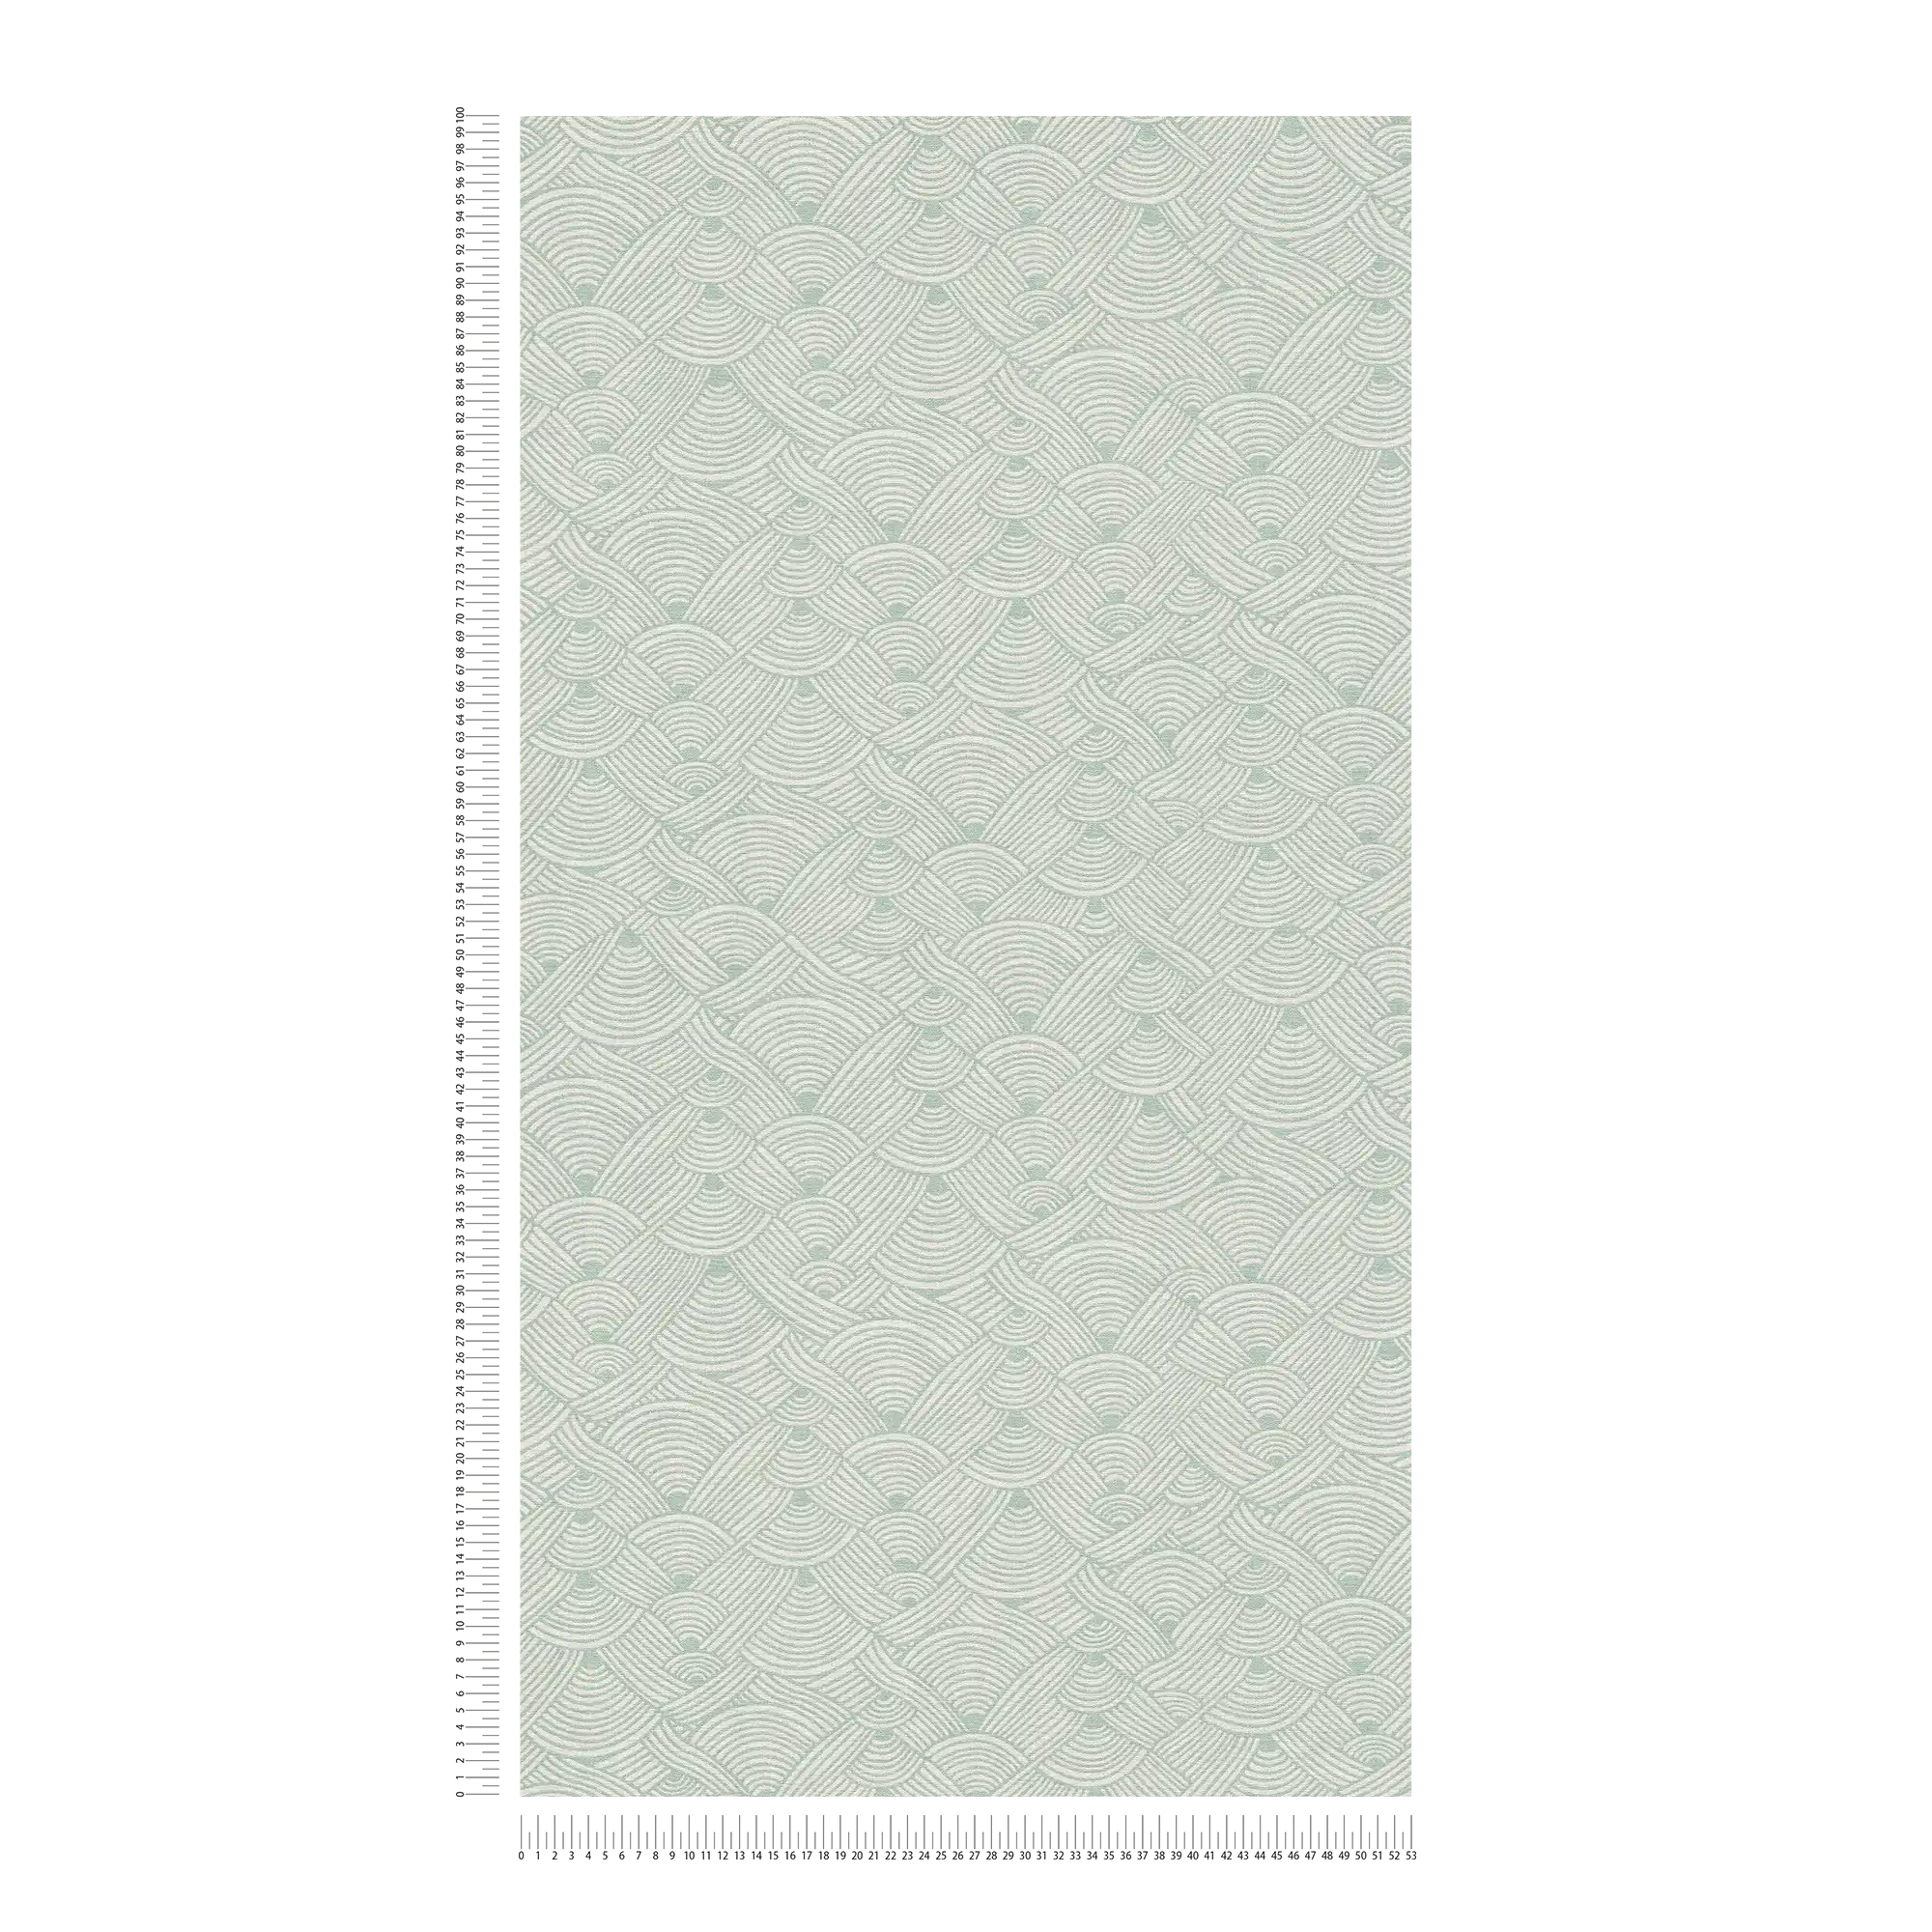             Graphic wallpaper wave pattern in earth colours - green, white, blue
        